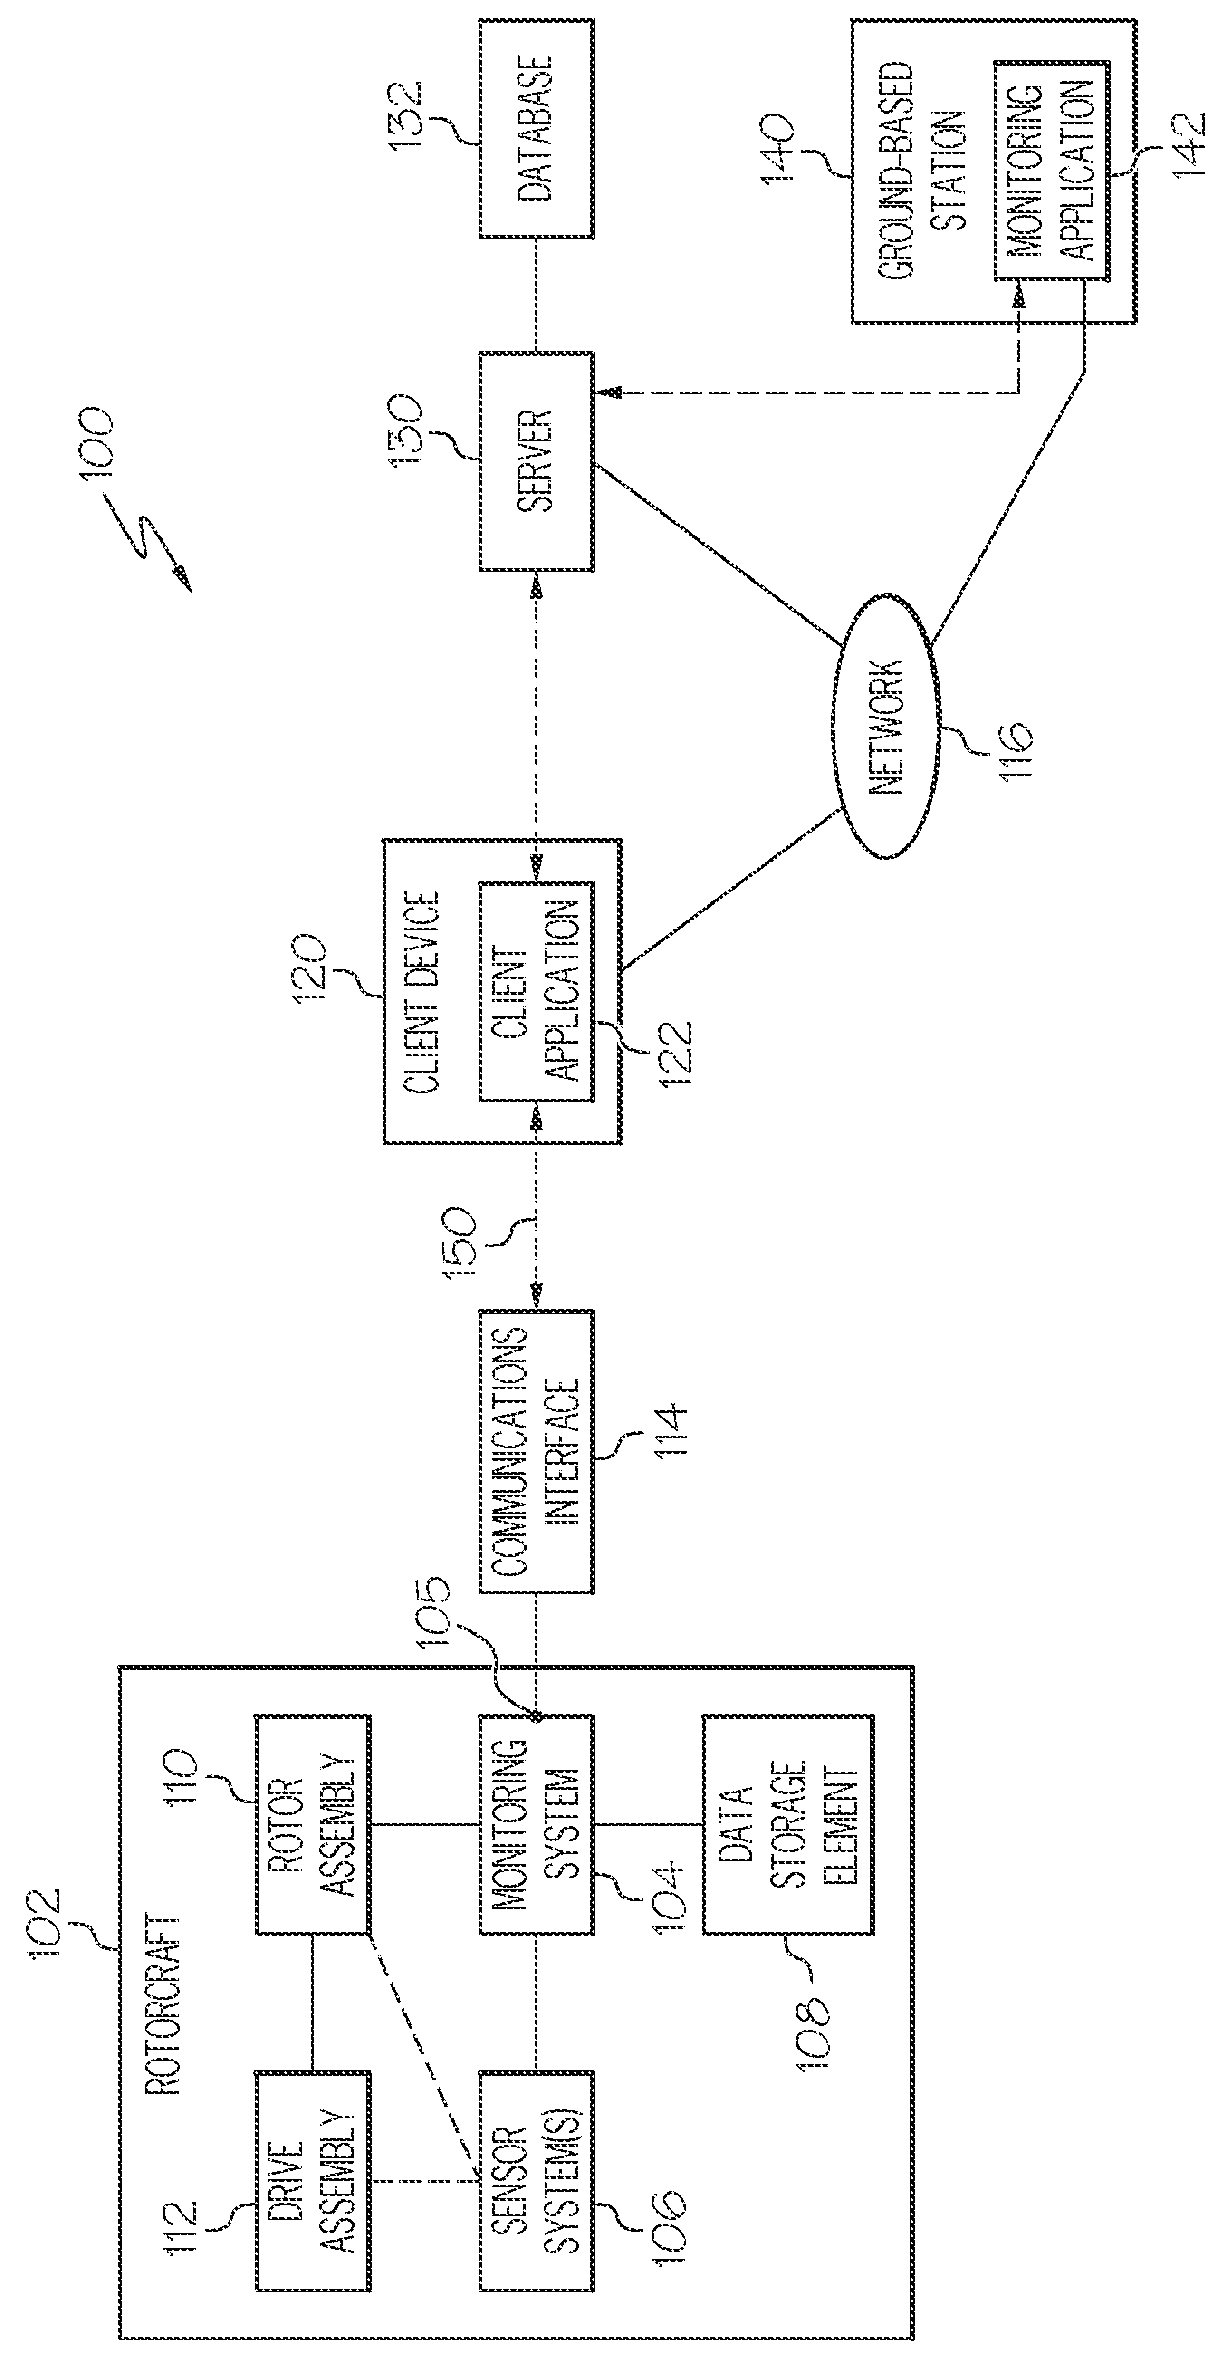 Methods and systems for monitoring vehicle systems using mobile devices